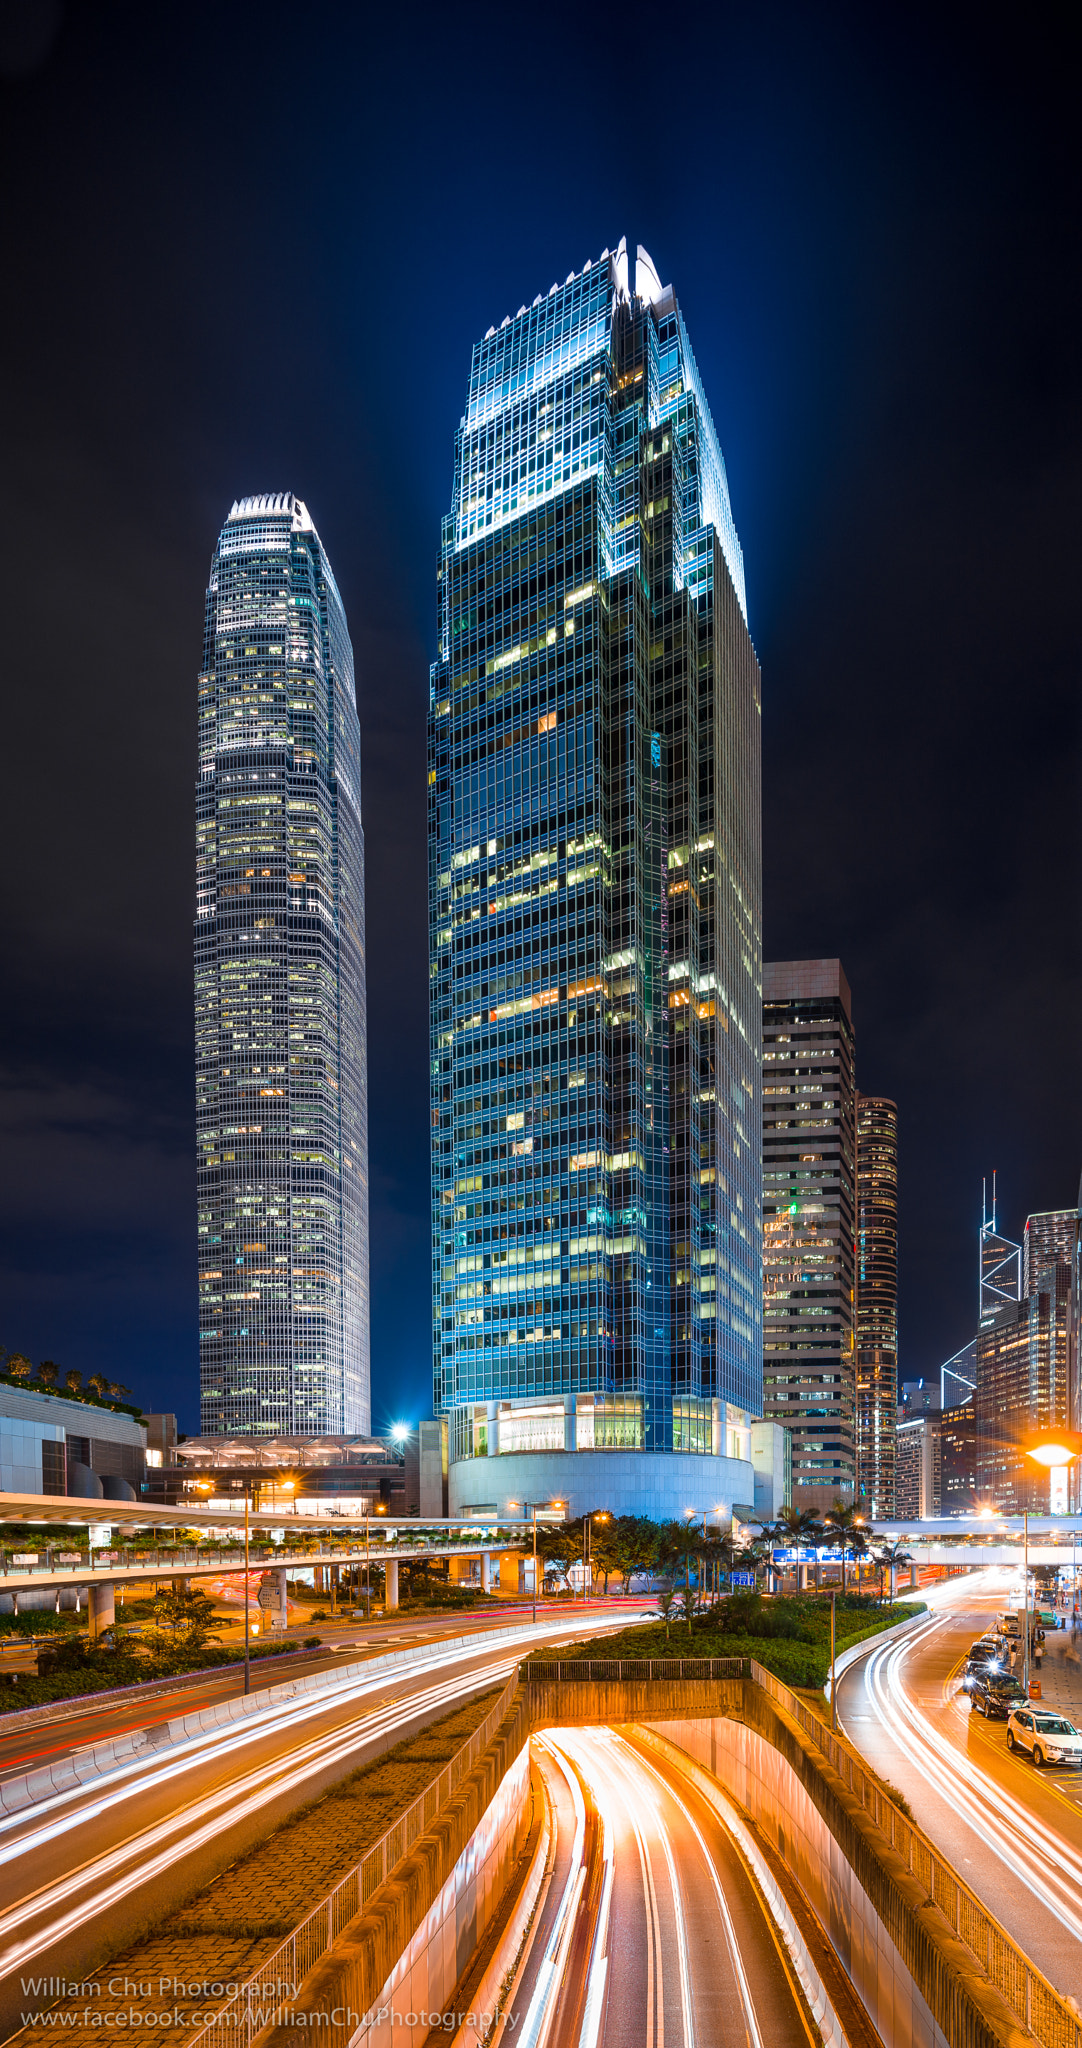 Sony a7R sample photo. One ifc & two ifc, hong kong photography